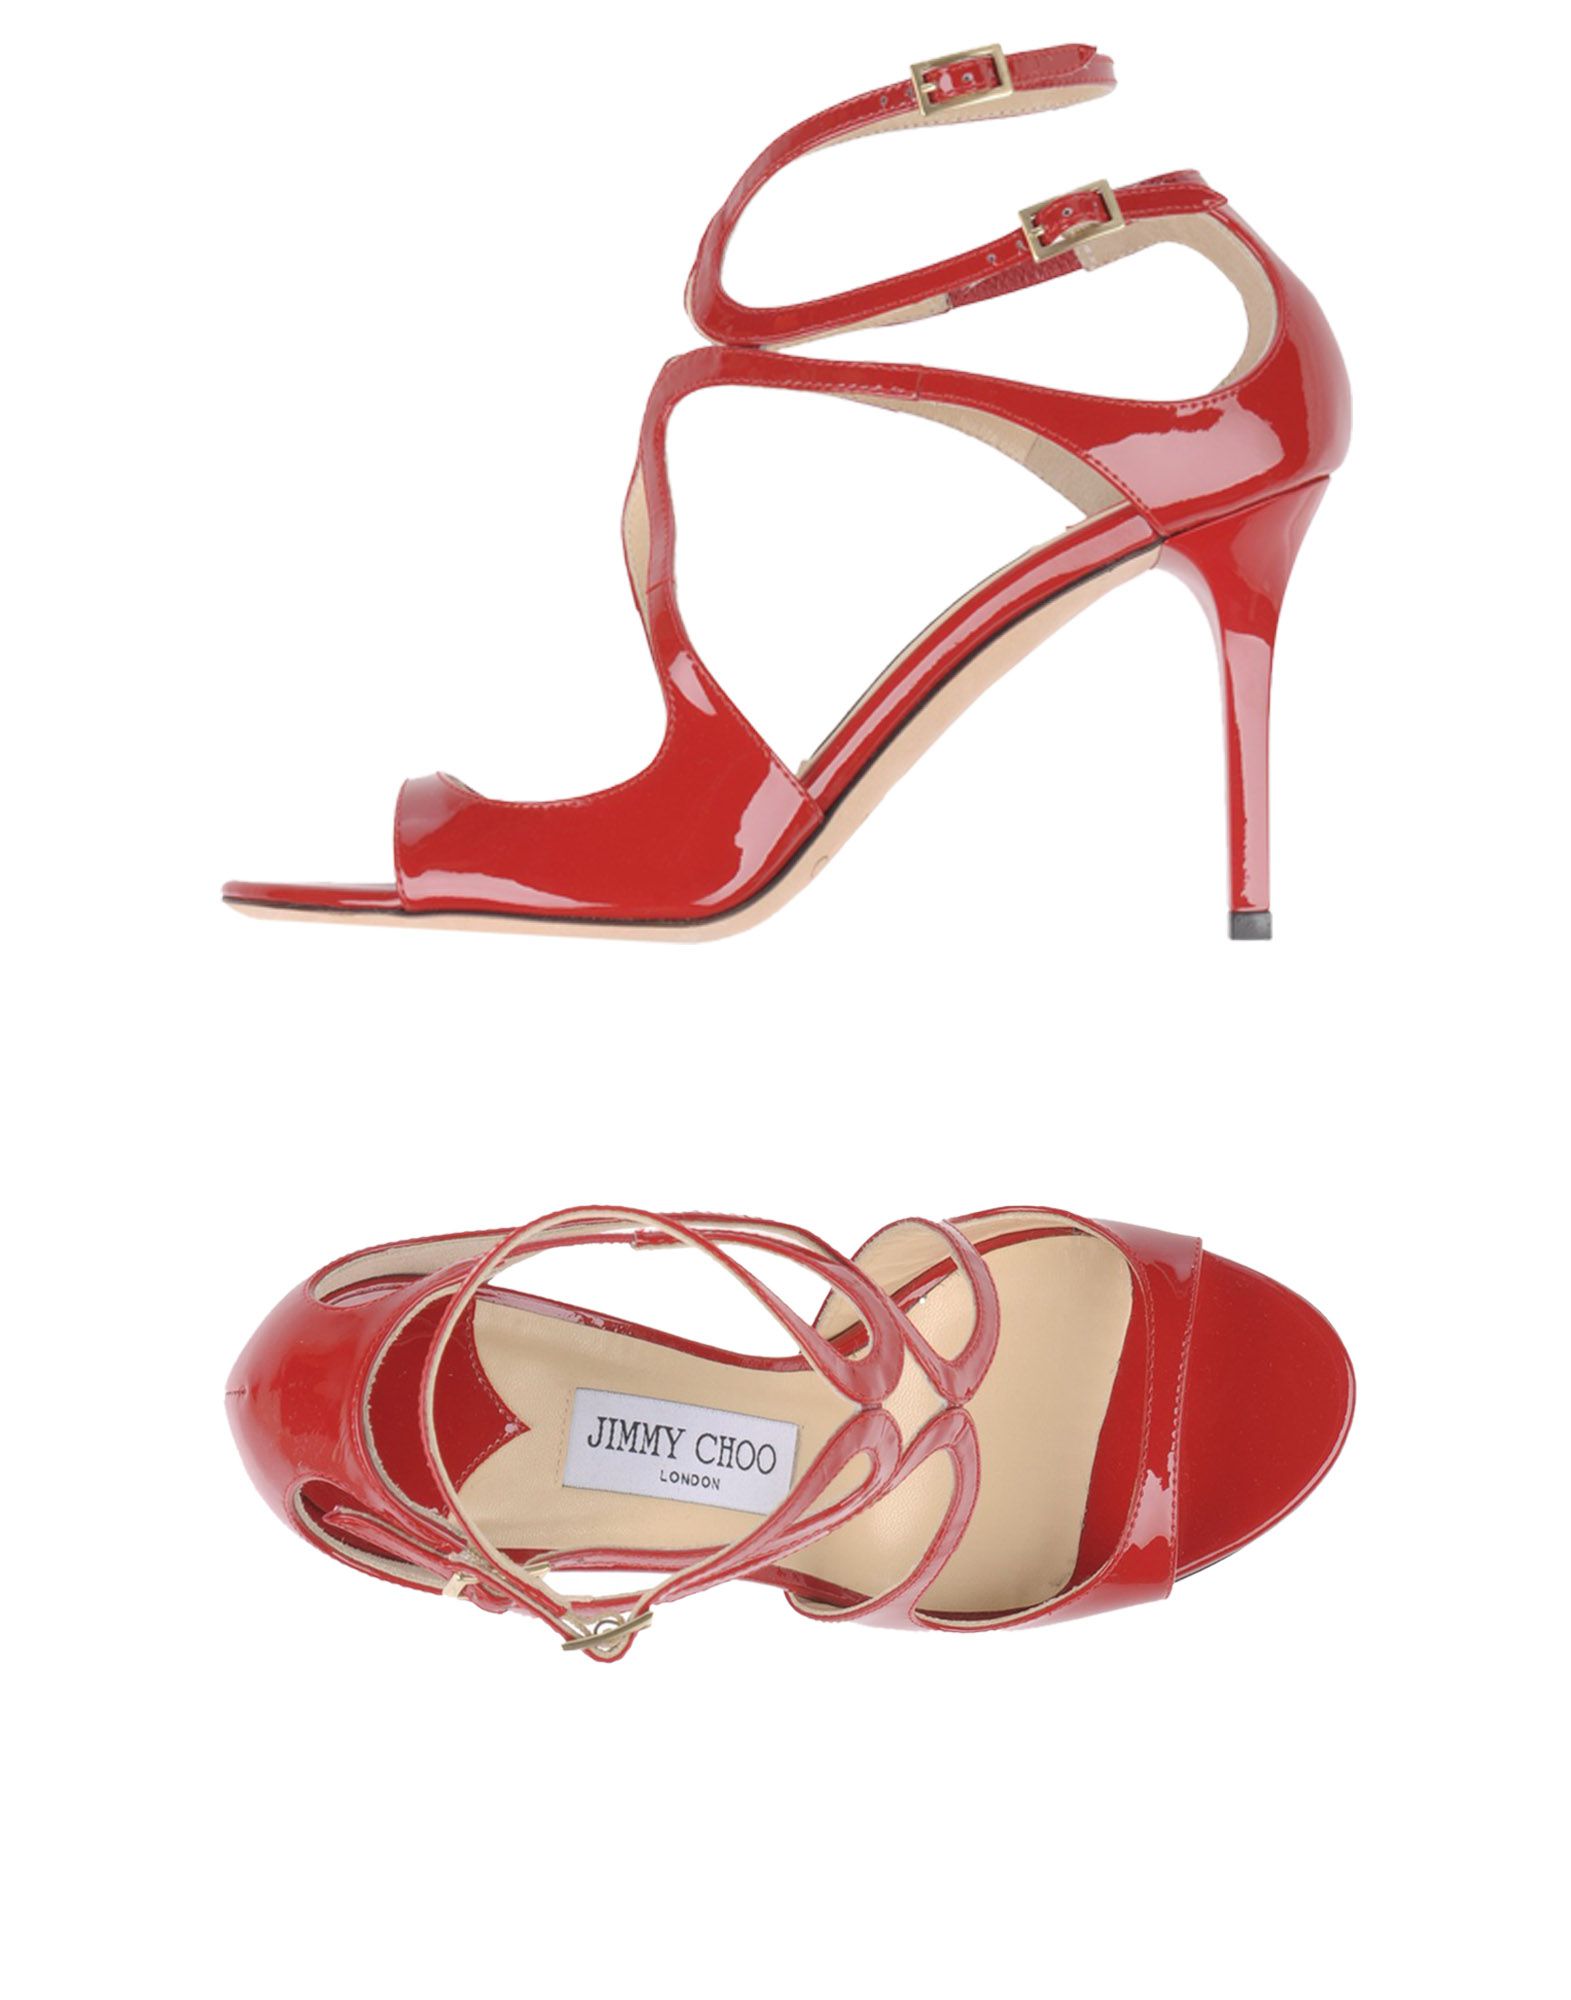 JIMMY CHOO Lance Red Patent Leather Strappy Sandals | ModeSens